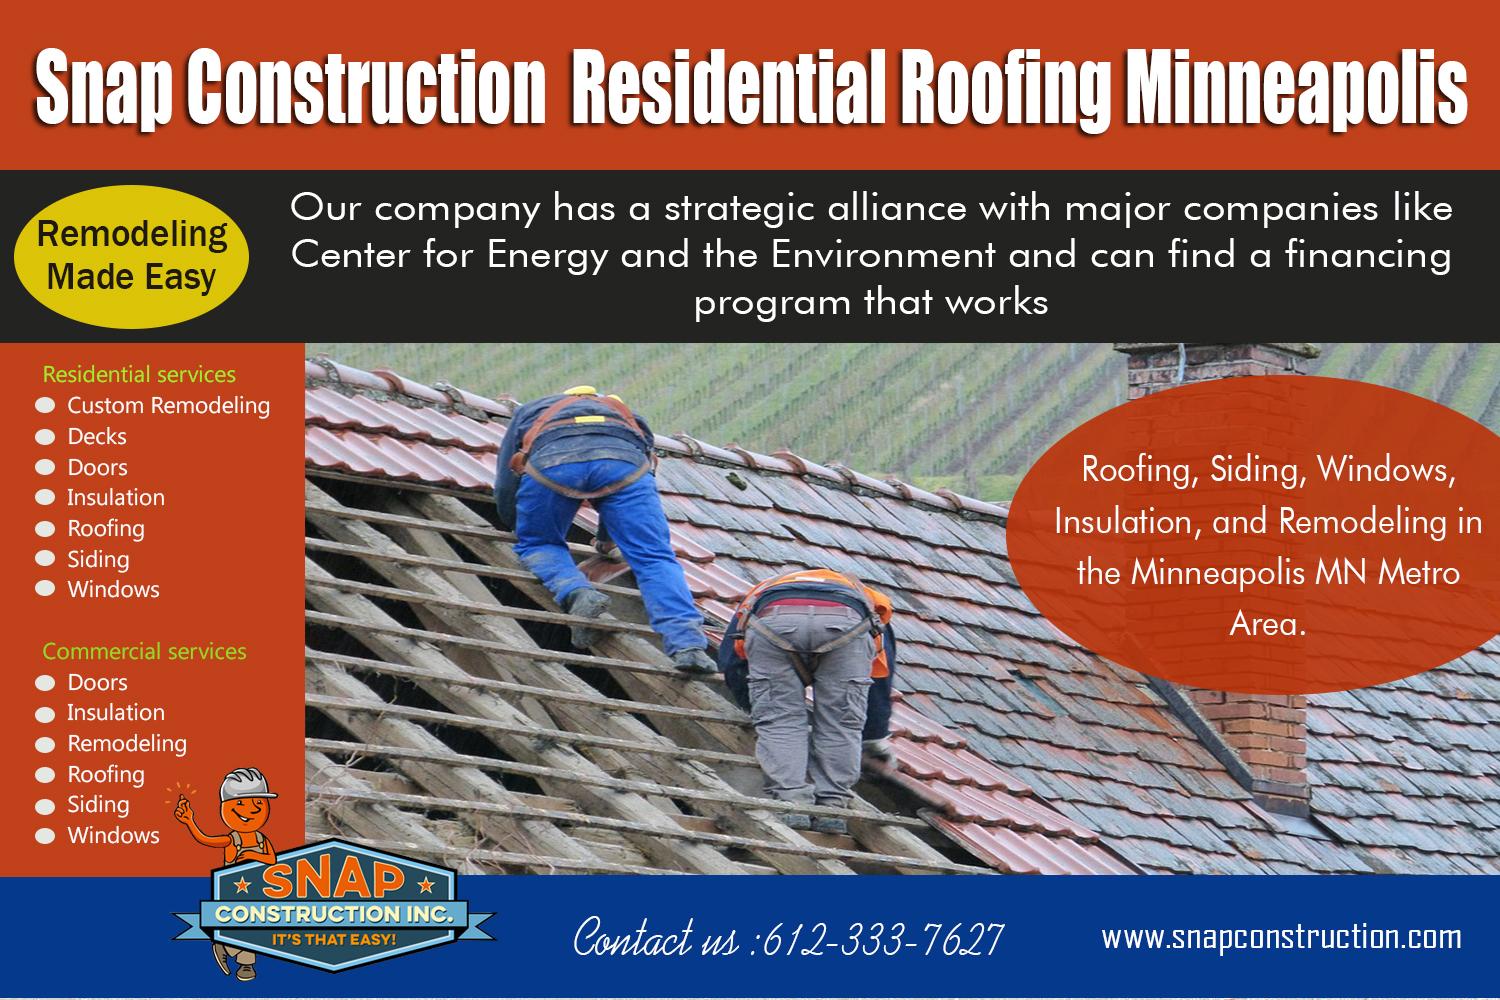 Snap Construction roofing contractor minneapolis mn